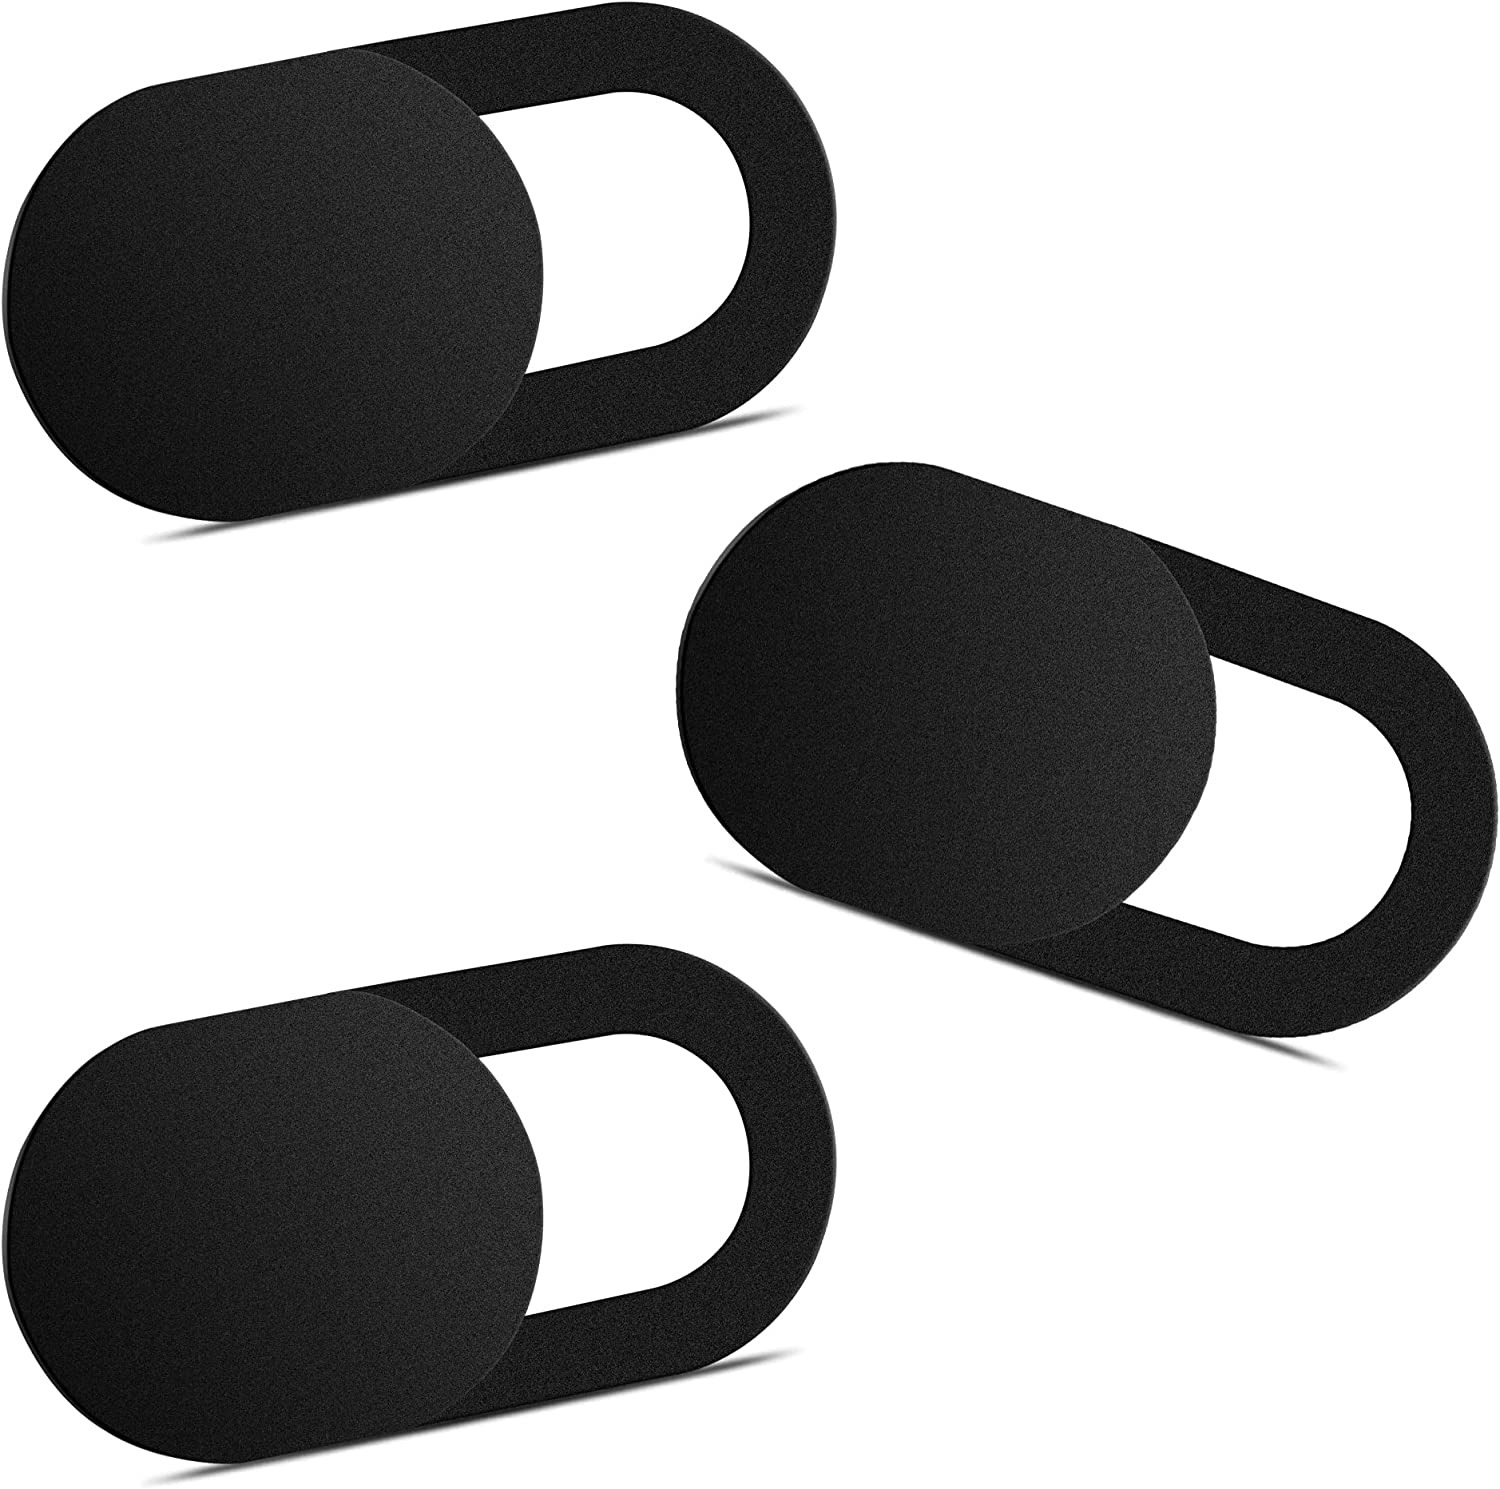 Webcam Cover (3 Pack), 0.03 Inch Ultra Thin Laptop Camera Cover Slide Black